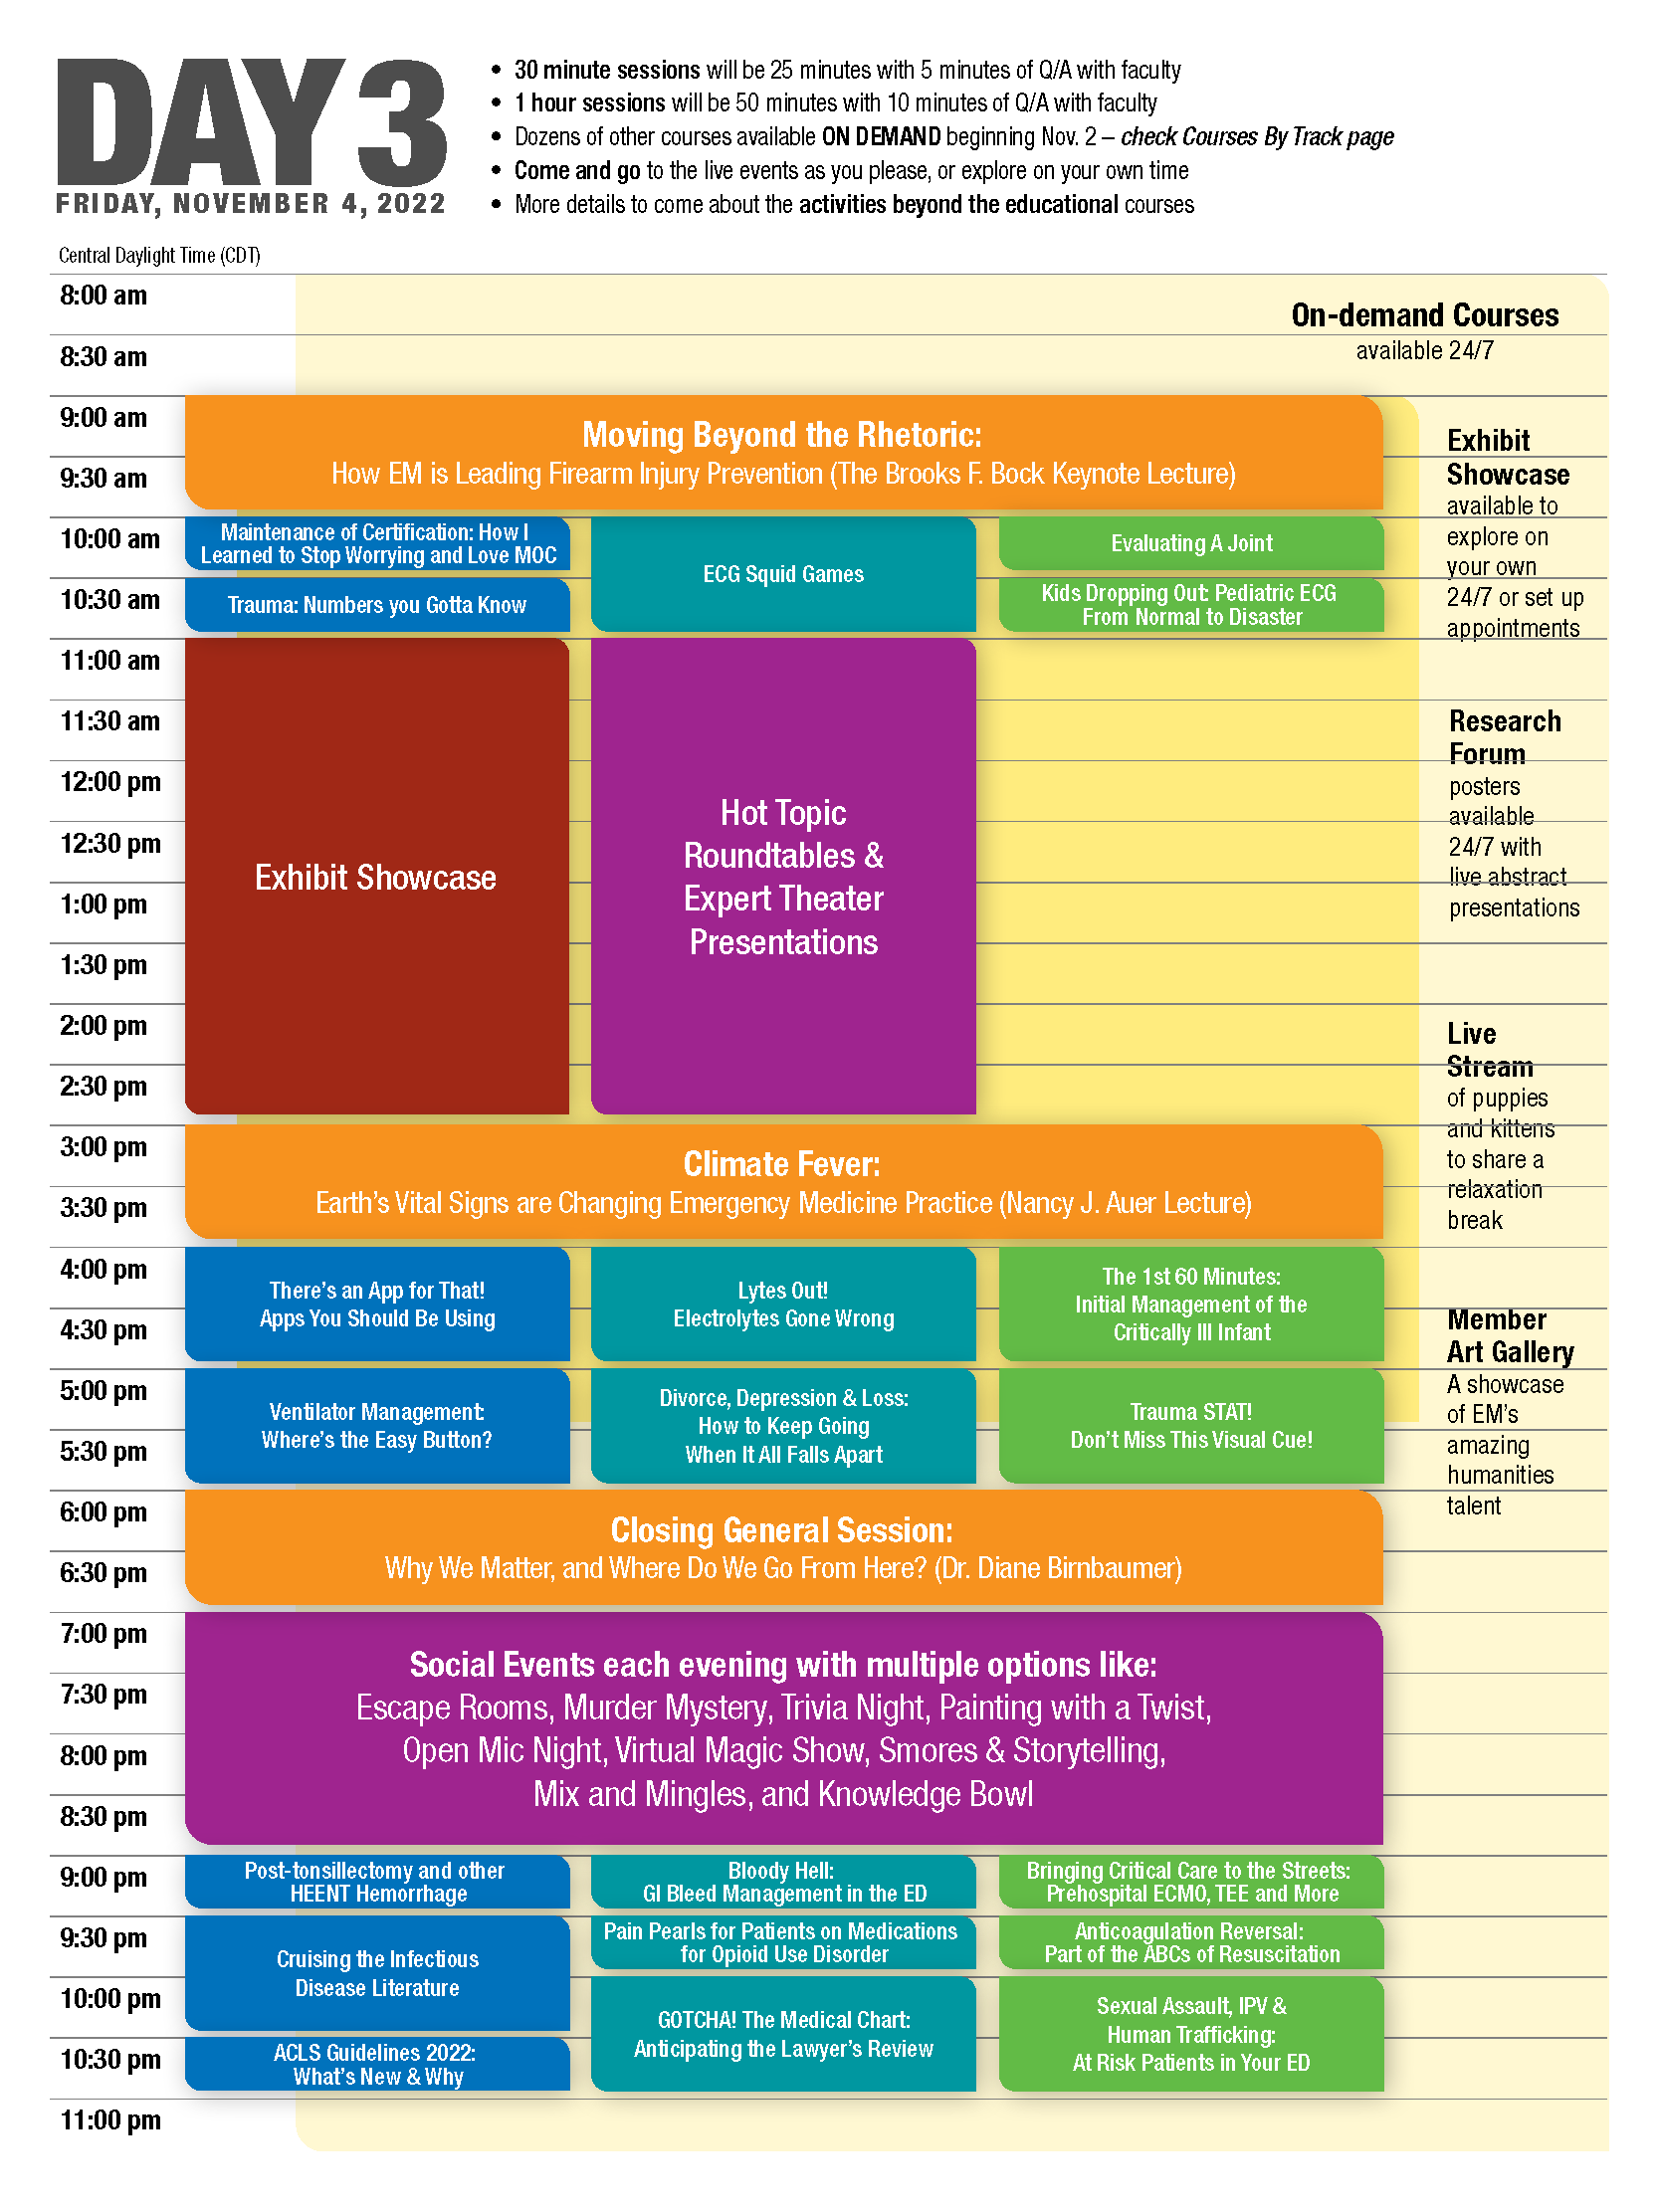 ACEP Scientific Assembly // Unconventional Schedule